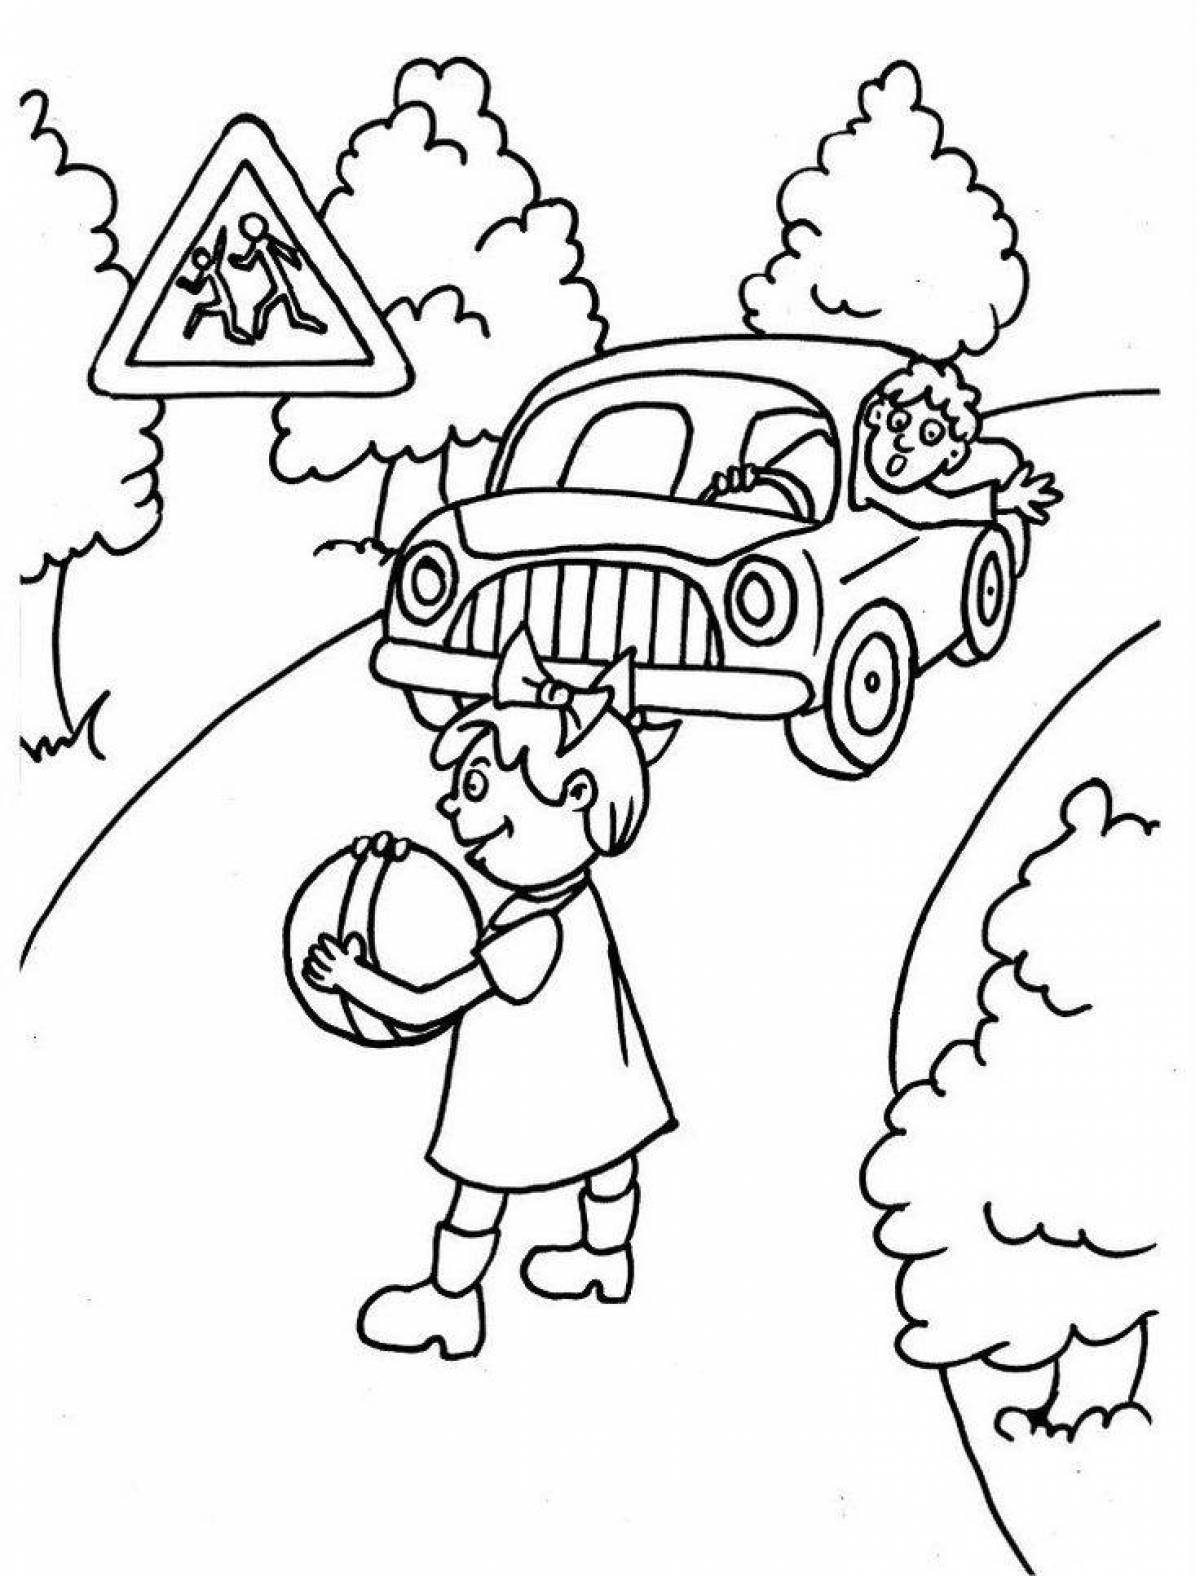 Bright rules of the road coloring for preschoolers